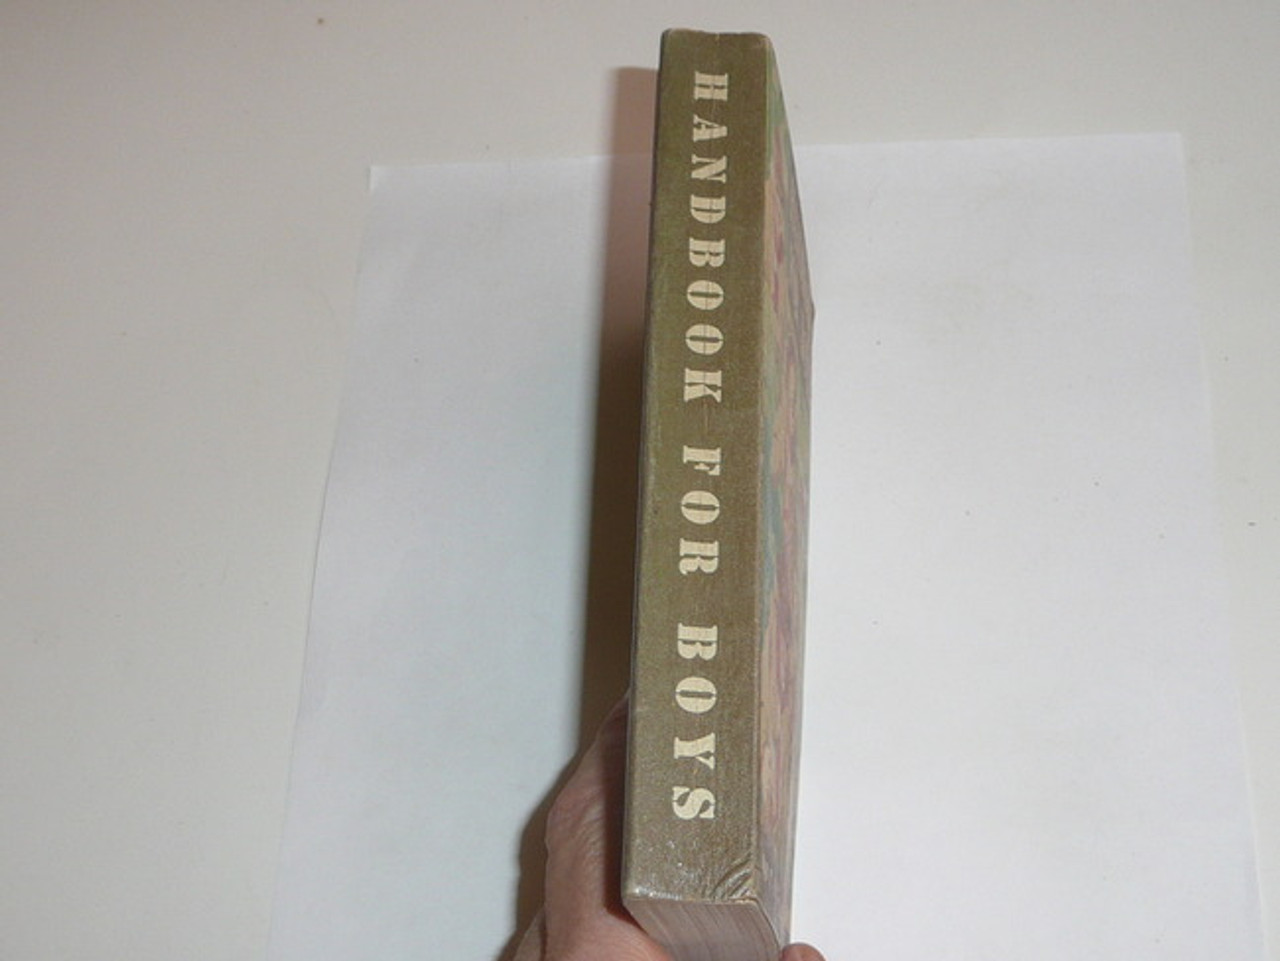 1949 Boy Scout Handbook, Fifth Edition, Second Printing, Don Ross Cover Artwork, MINT condition, one star on last page